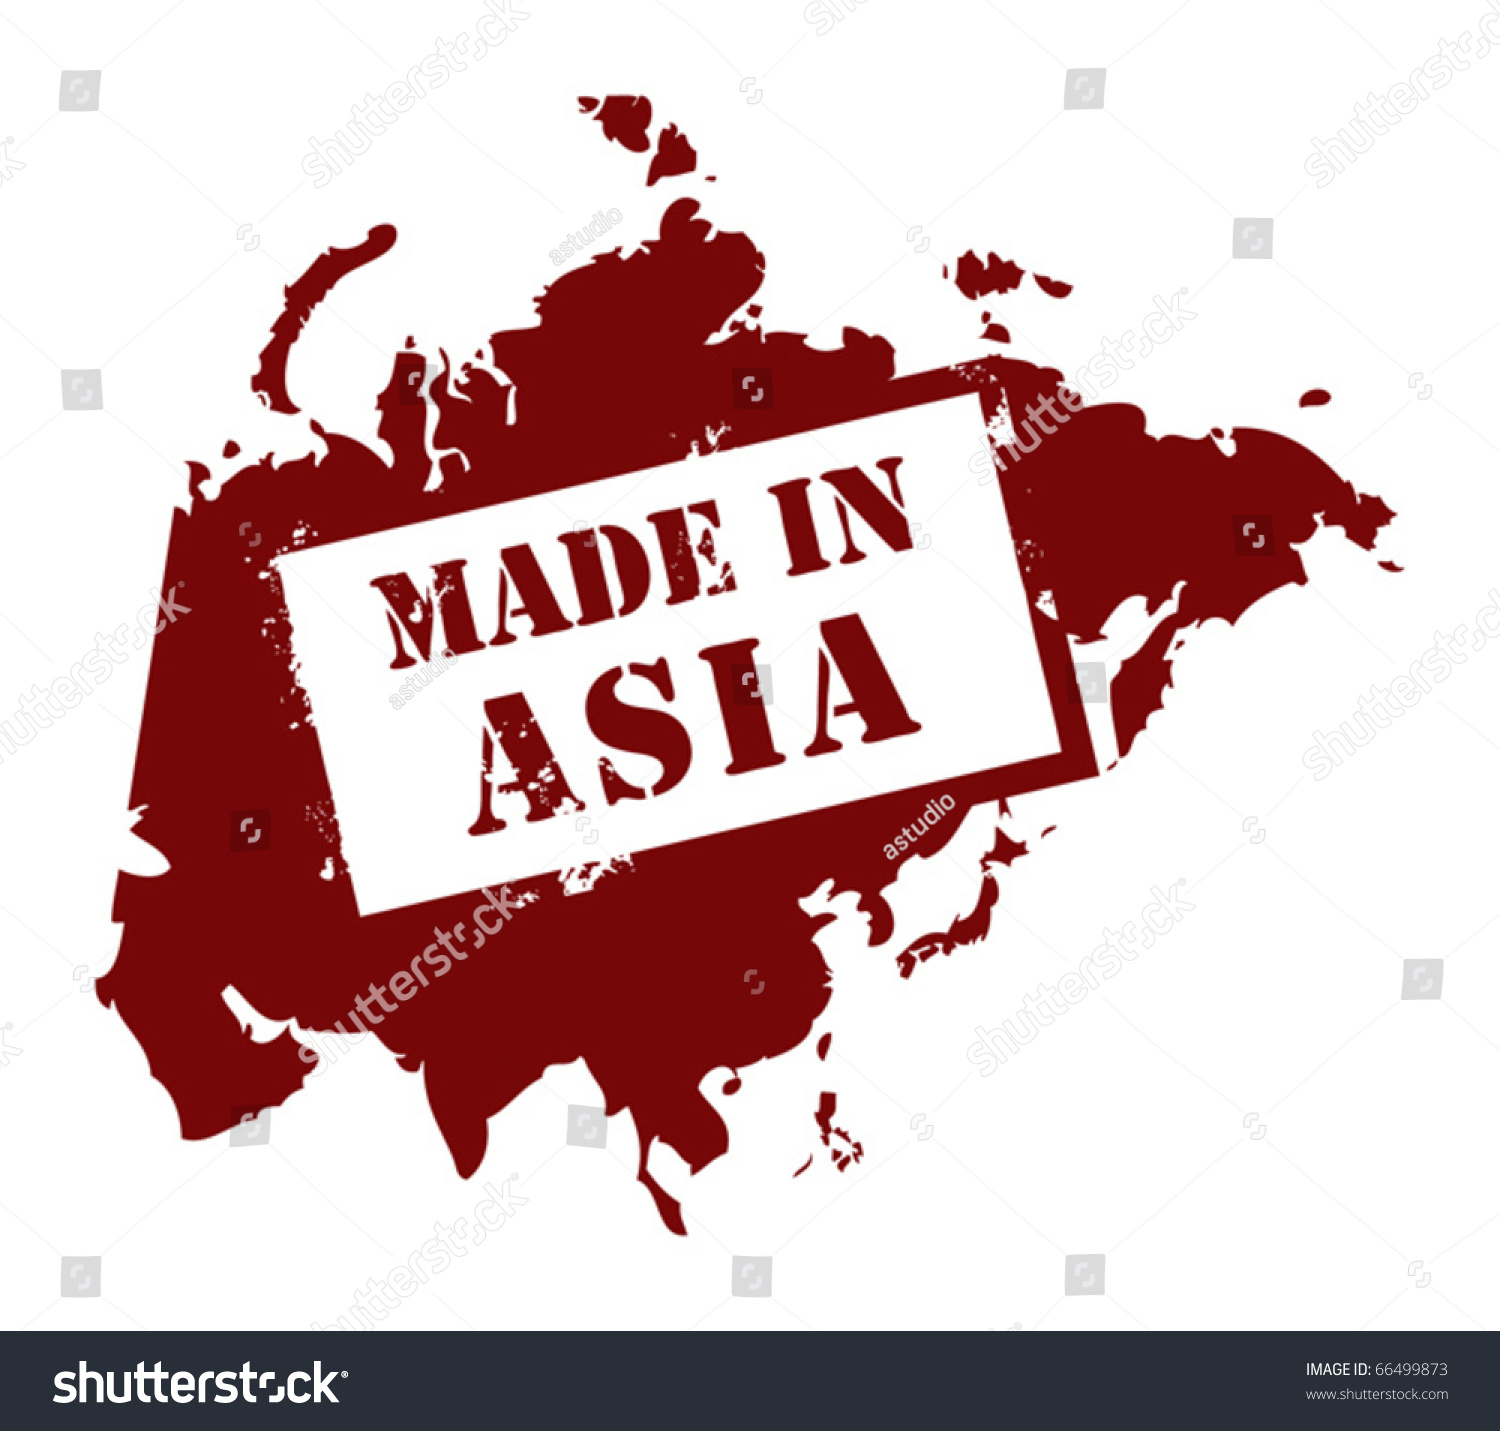 Asia words. Made in Asia. Made in Asia фестиваль. Asia Word. Heroes made in Asia.